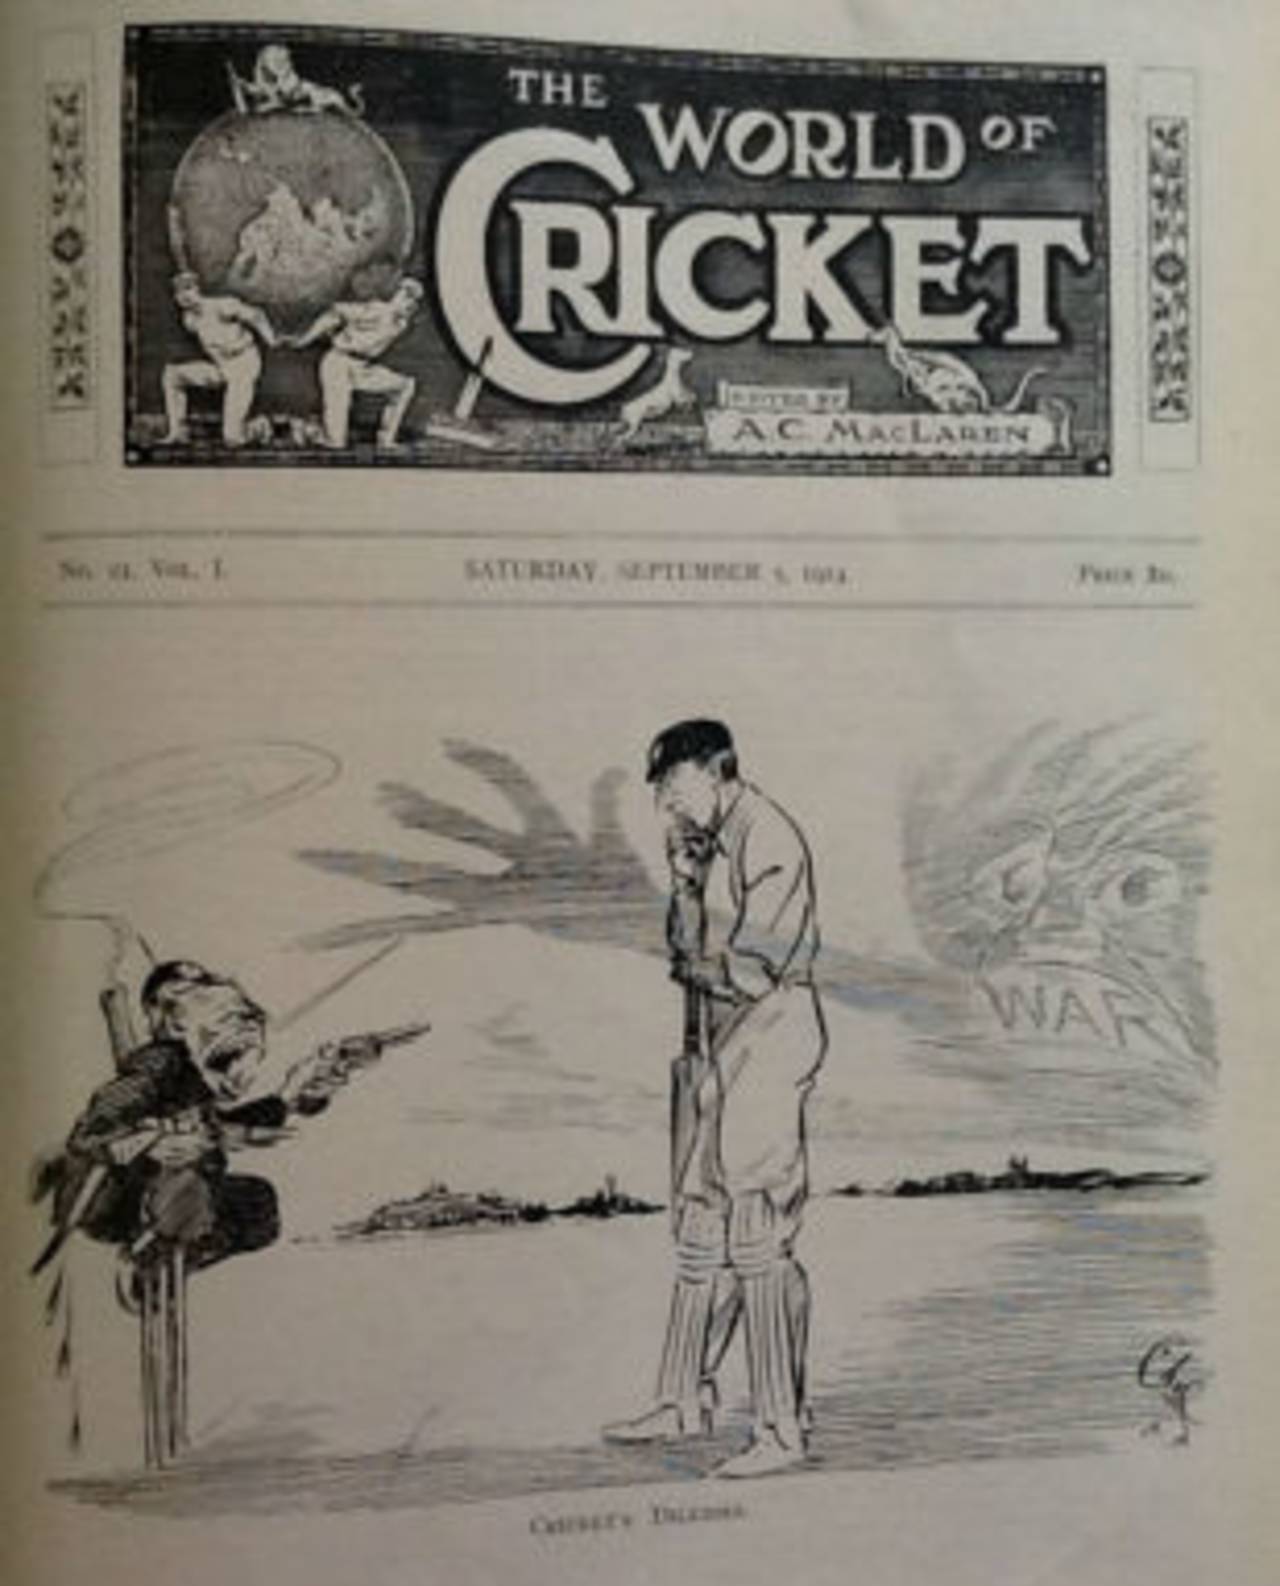 The cover of <I>Cricket</I> magazine days after the first-class season was prematurely ended&nbsp;&nbsp;&bull;&nbsp;&nbsp;Martin Williamson